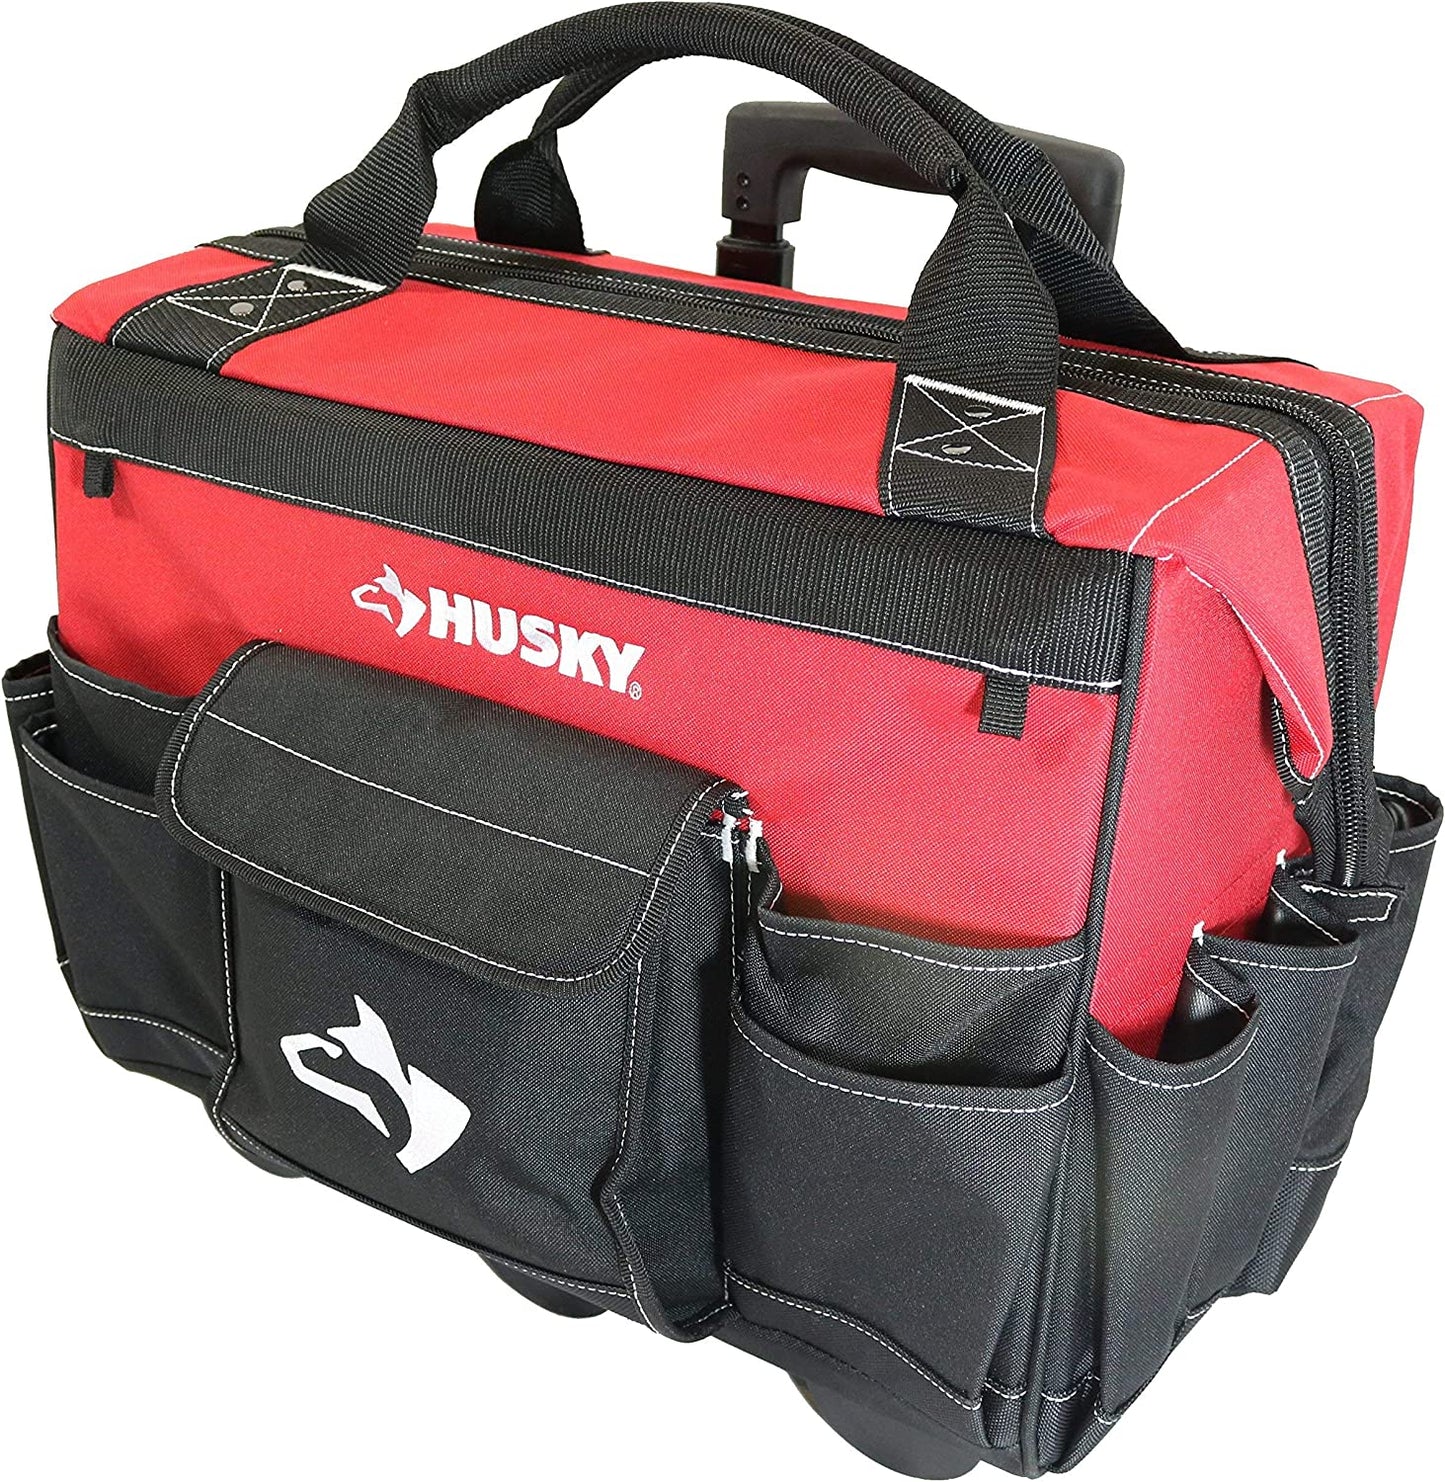 Husky GP-43196N13 18" Water Resistant Contractor's Rolling Tool Tote Bag with Telescoping Handle